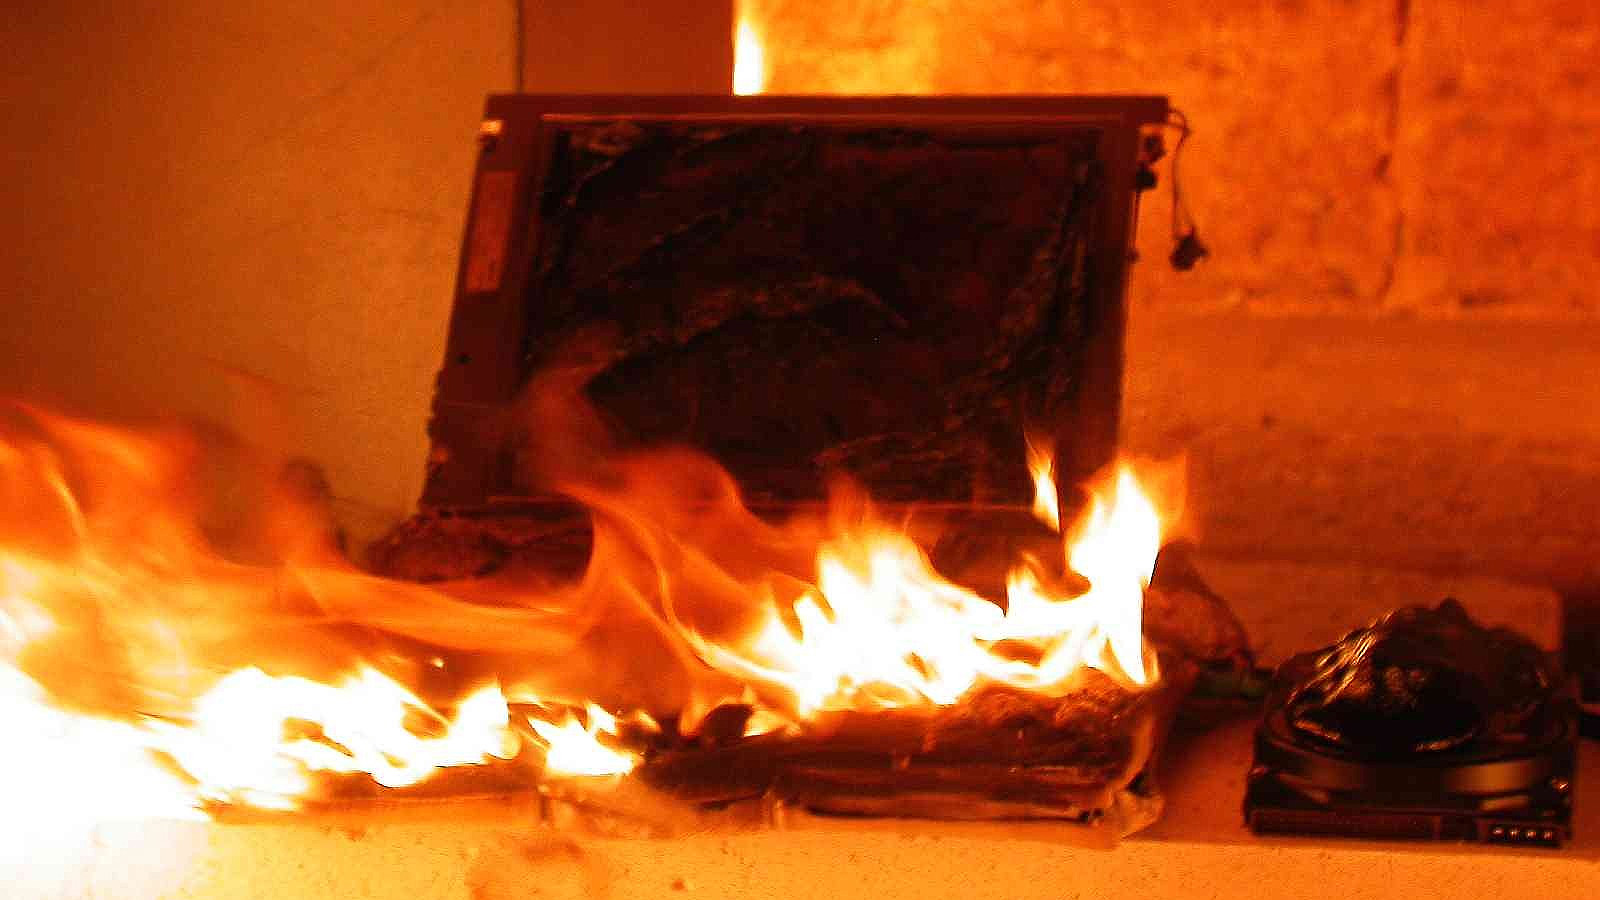 14 Reasons To Keep Your Gadgets Away From Open Flame